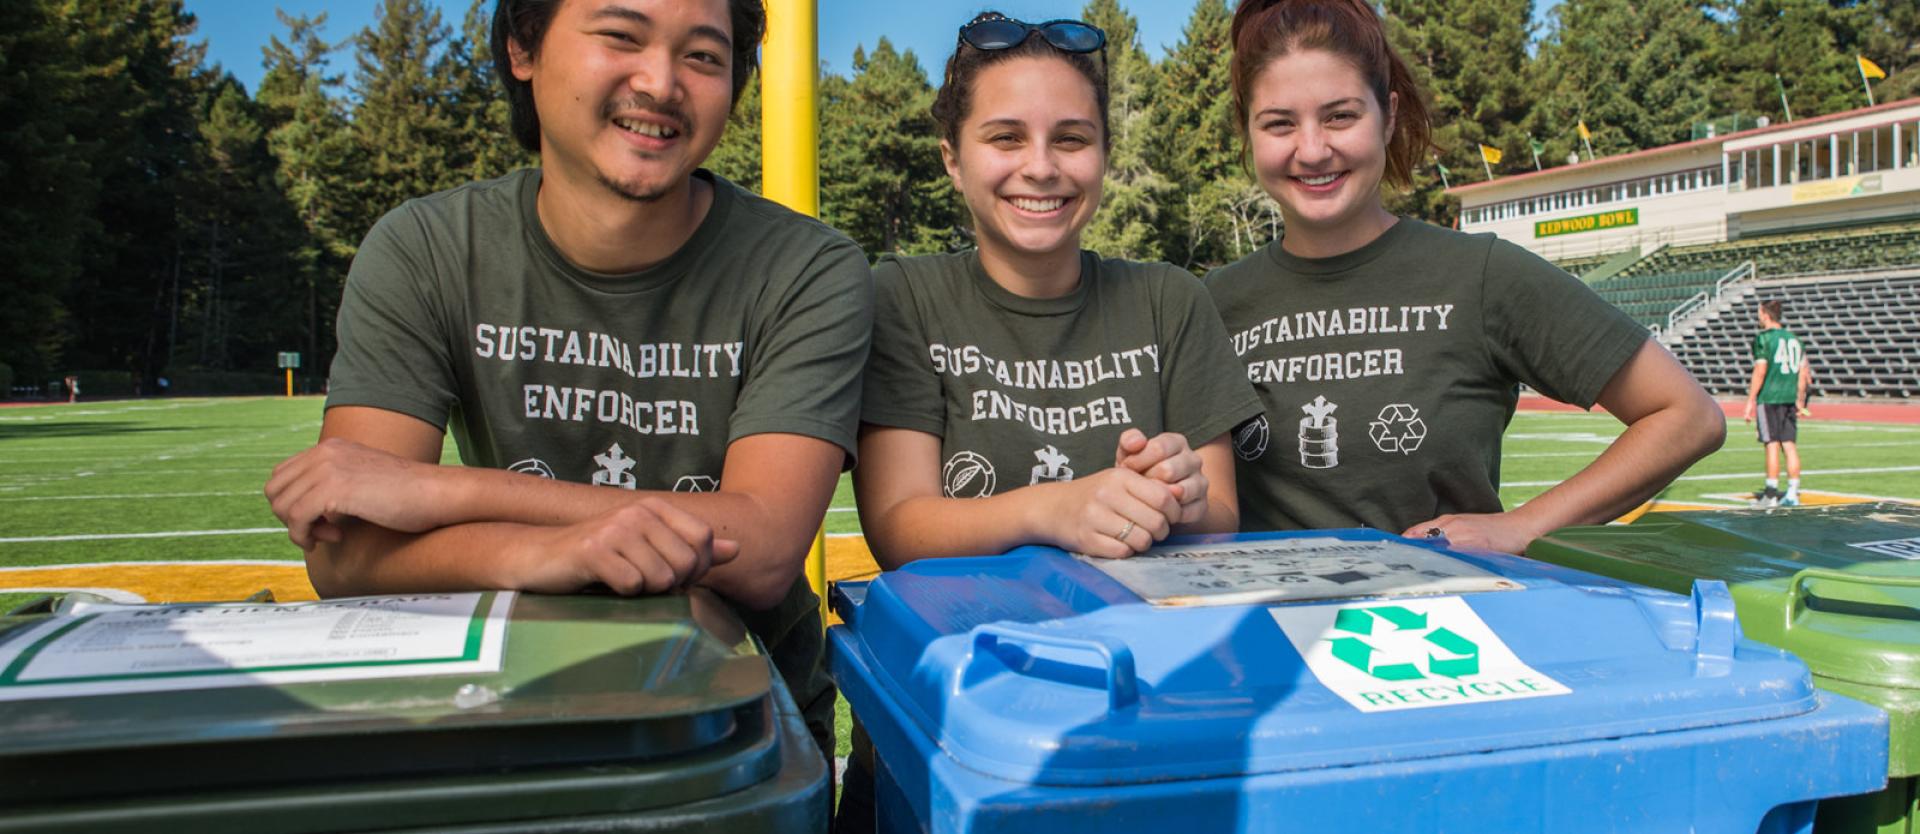 Three students wearing shirts that say Sustainability Enforcer standing in front of two recycling bins